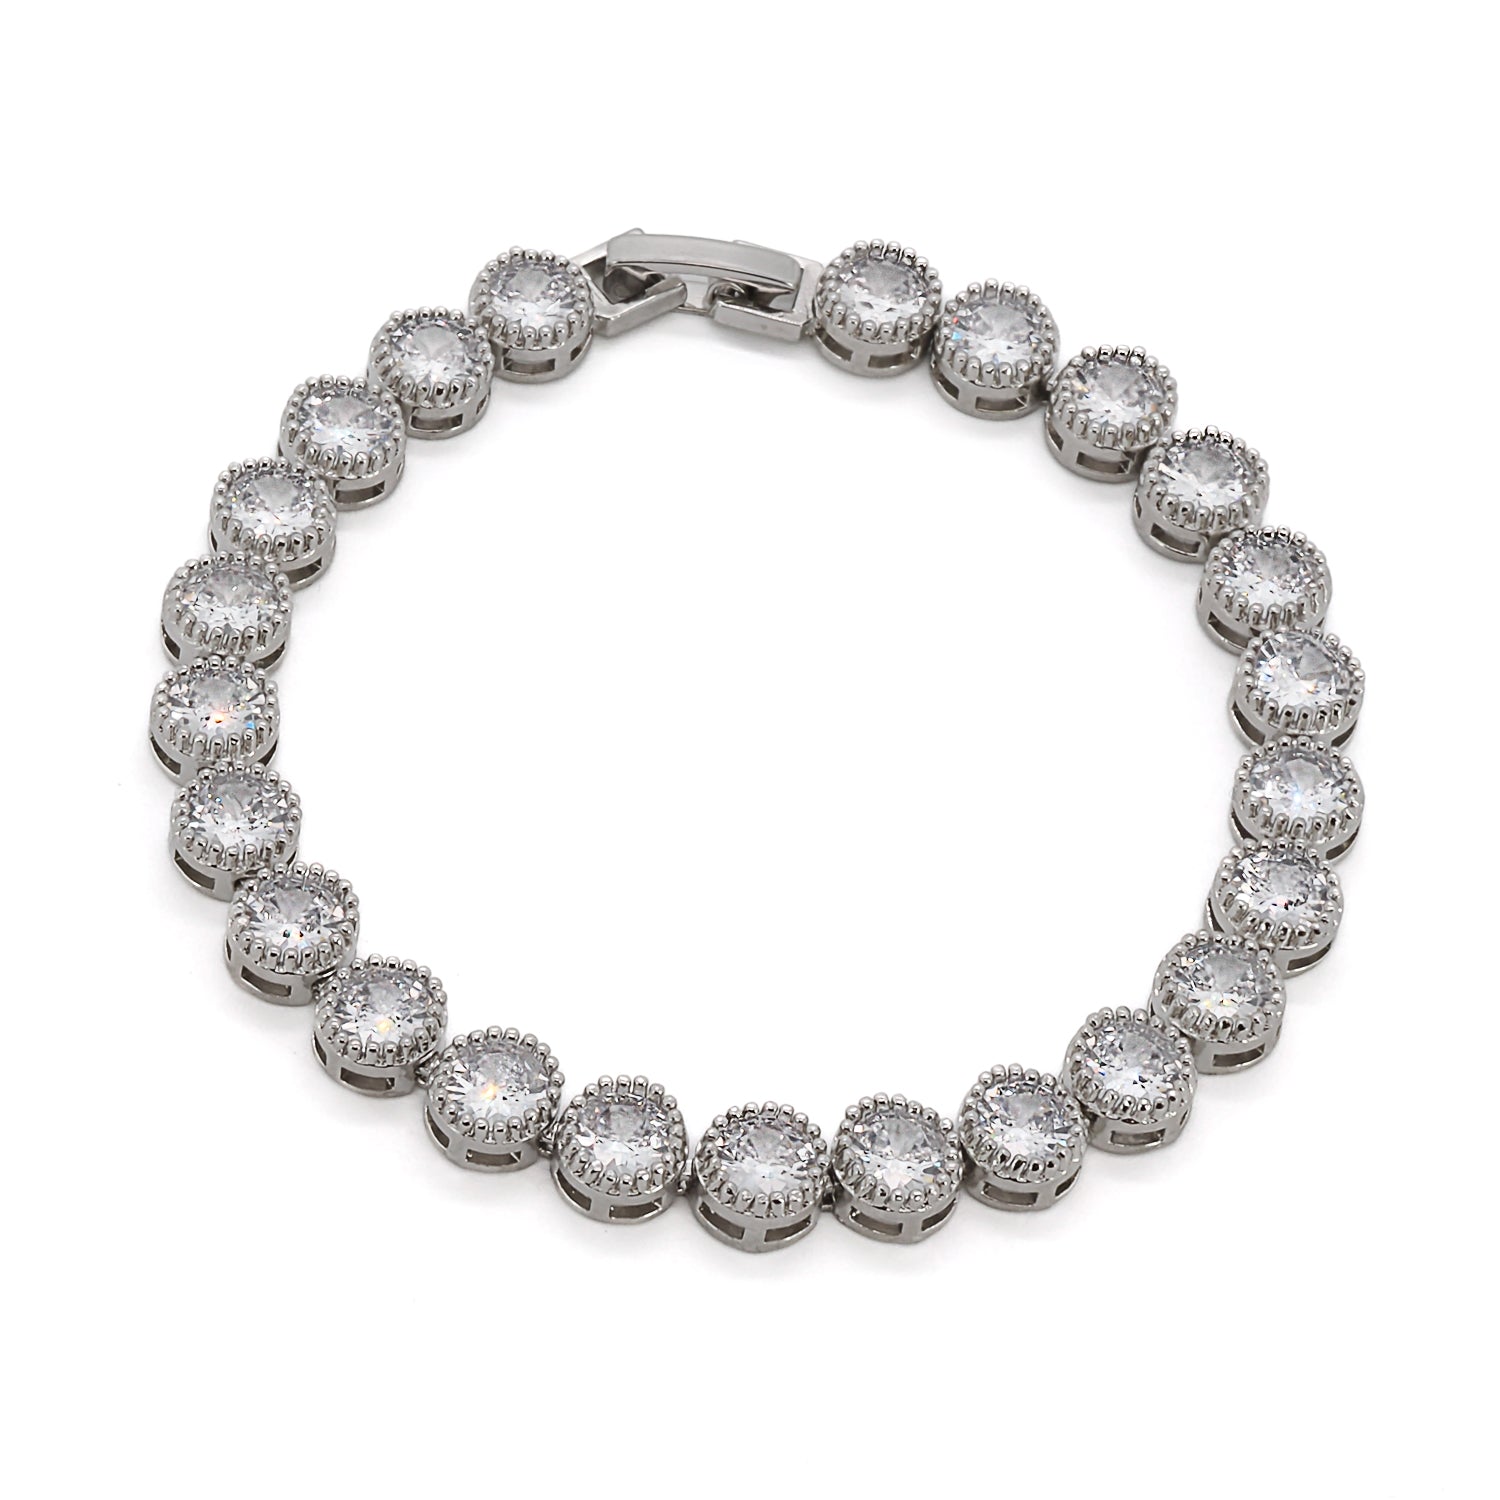 Close-up of the Diamond Tennis Bracelet, showcasing its intricate silver on brass band and sparkling zircon stones.